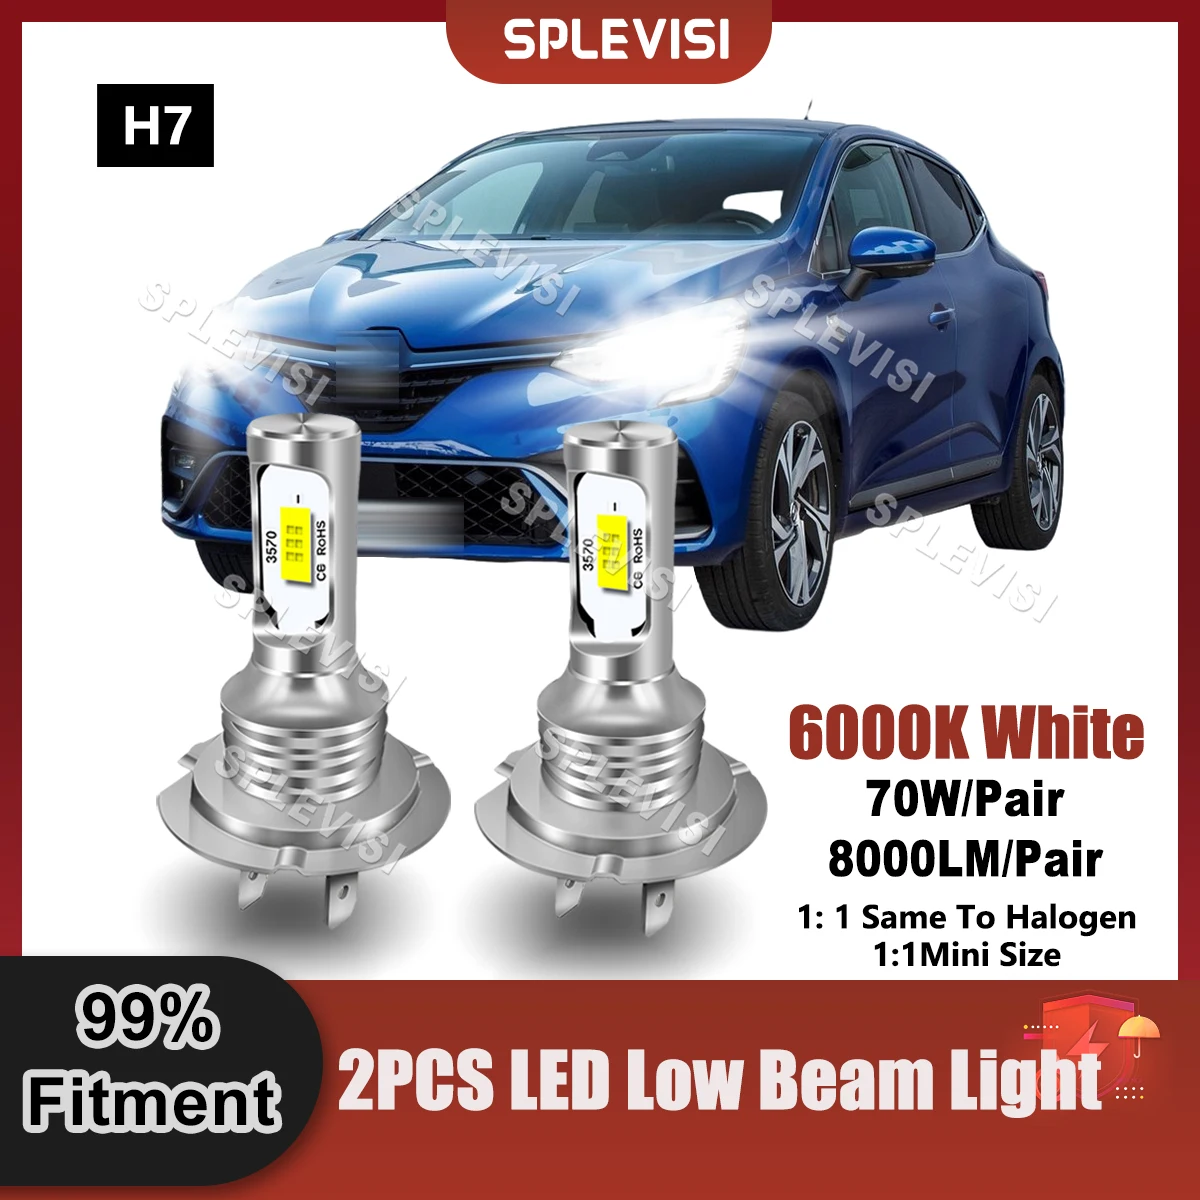 

SPLEVISI Car LED Headlight H7 Low Beam 8000LM For Renault Clio MK4 2012 2013 2014 2015 2016 2017 2018 2019 2020 2021 2022 2023